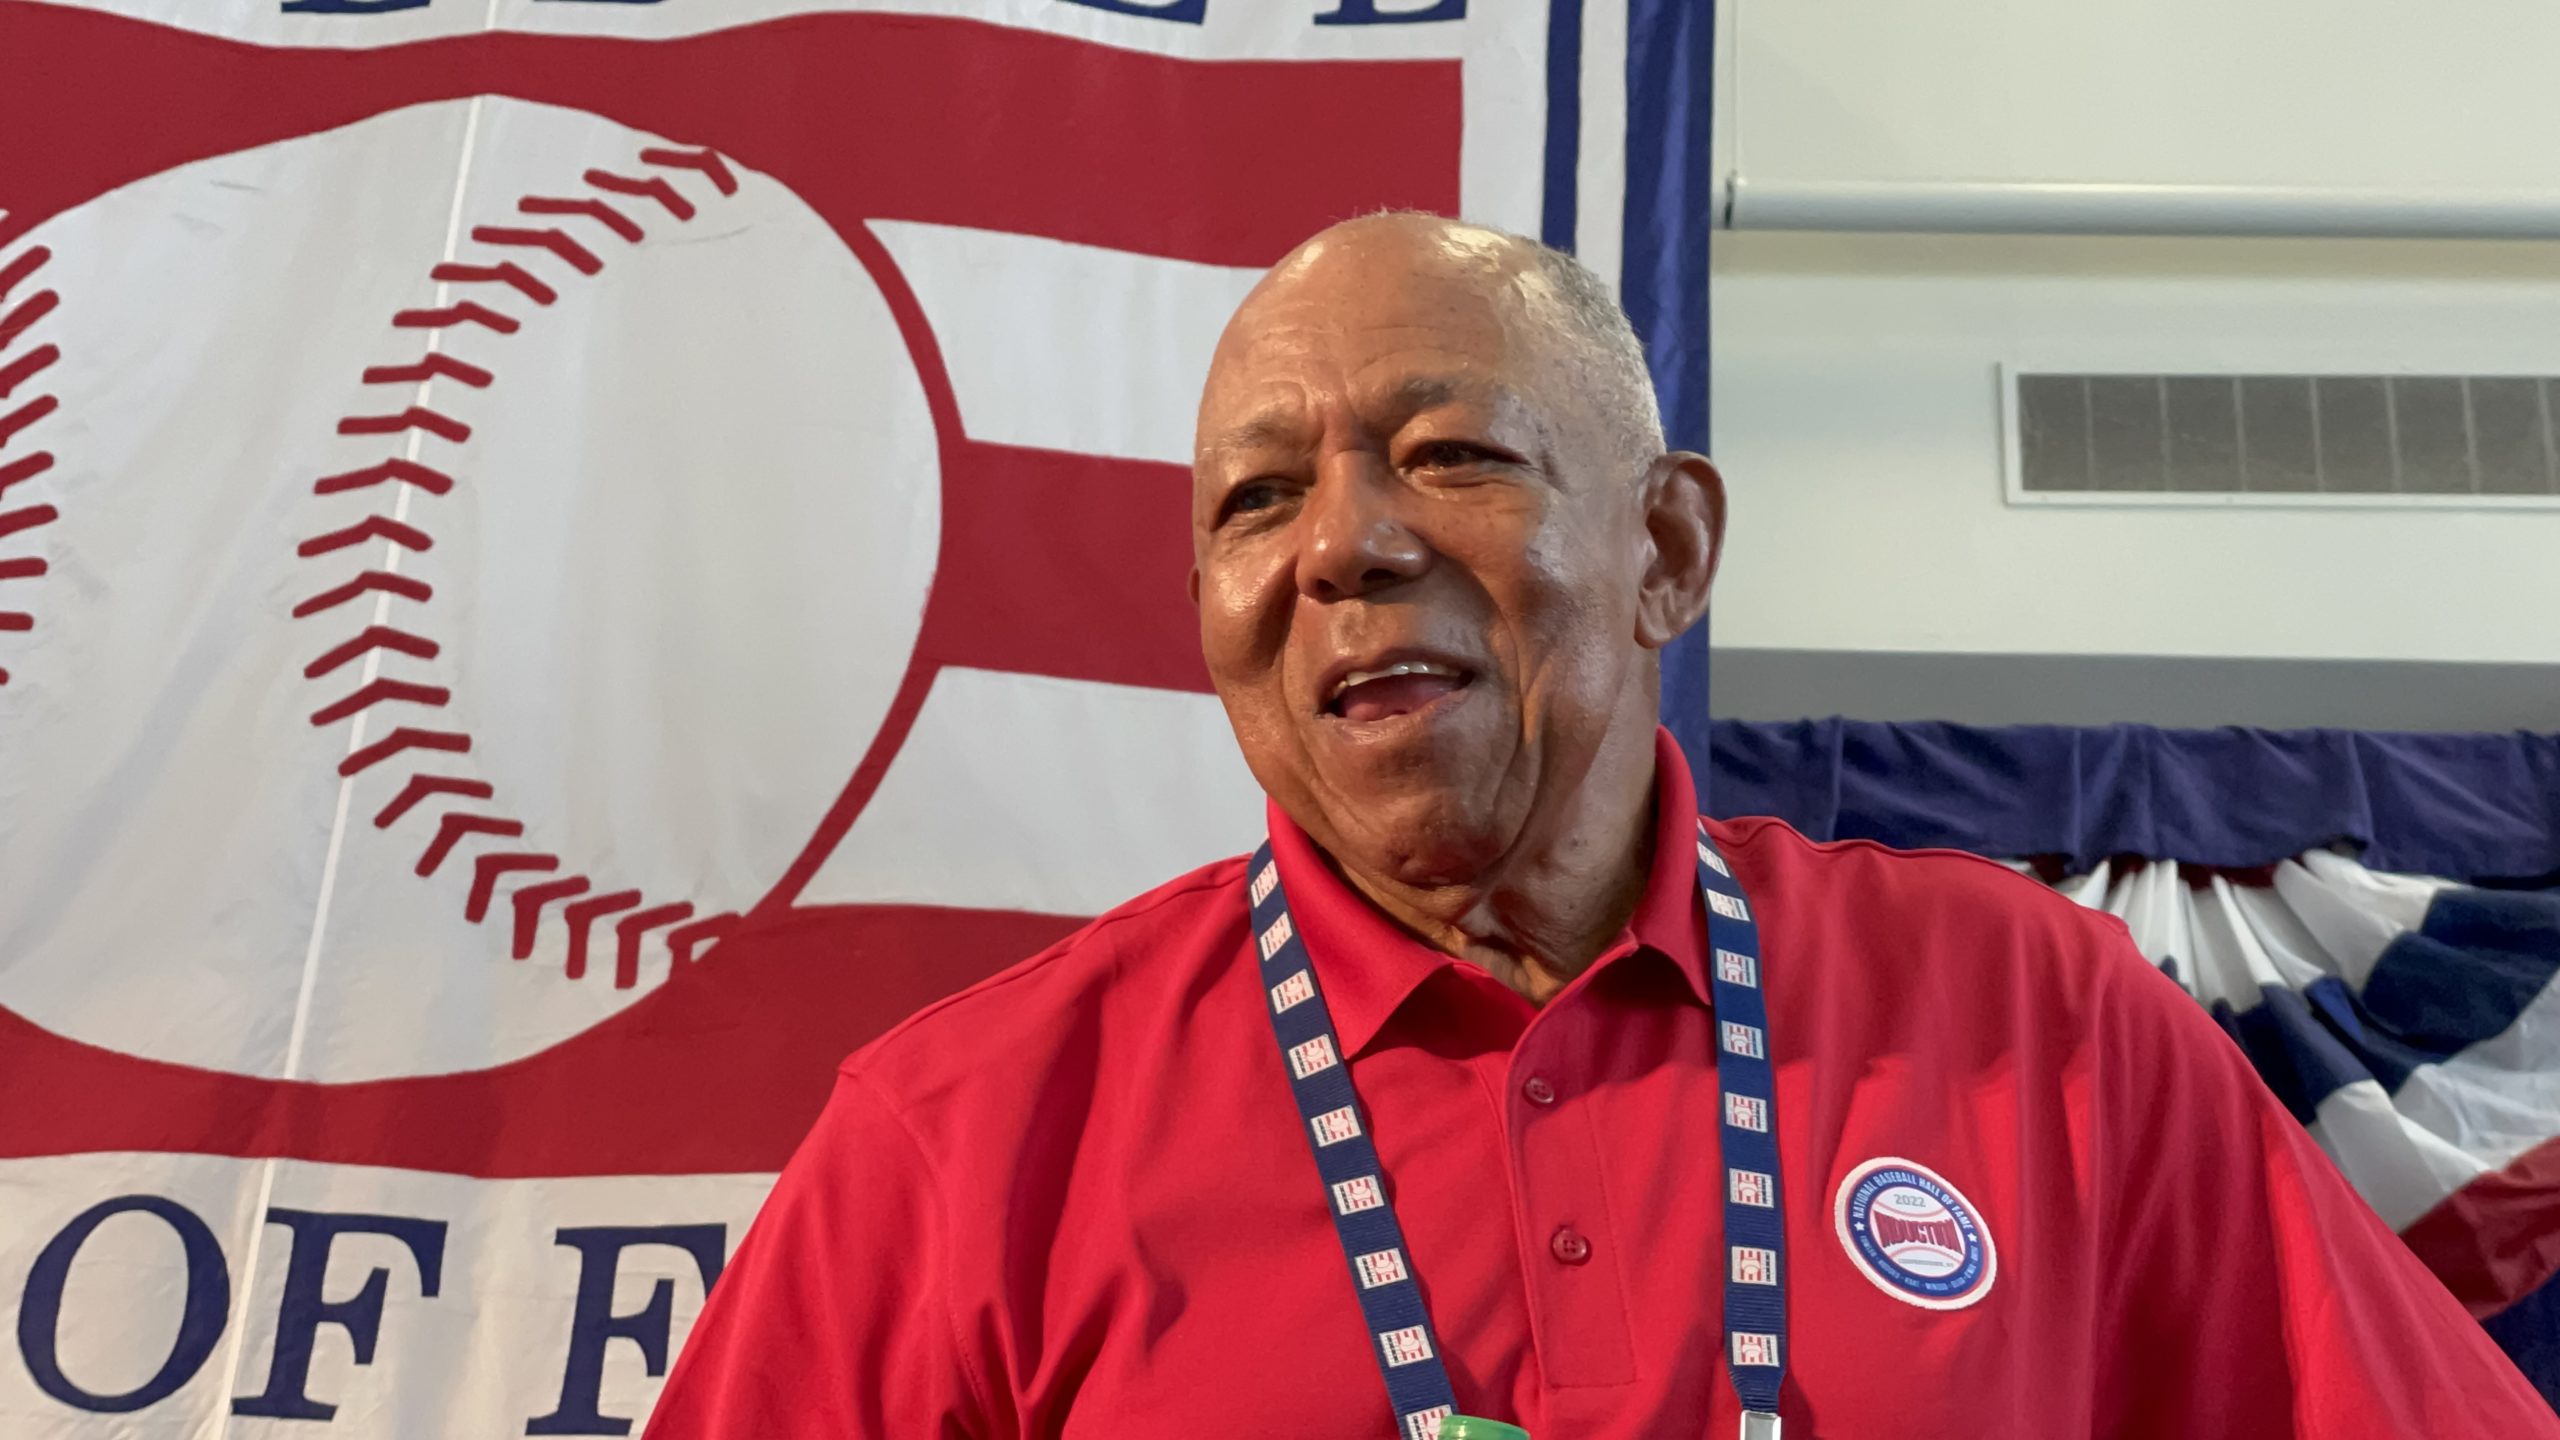 Former Twins teammates Jim Kaat and Tony Oliva inducted into